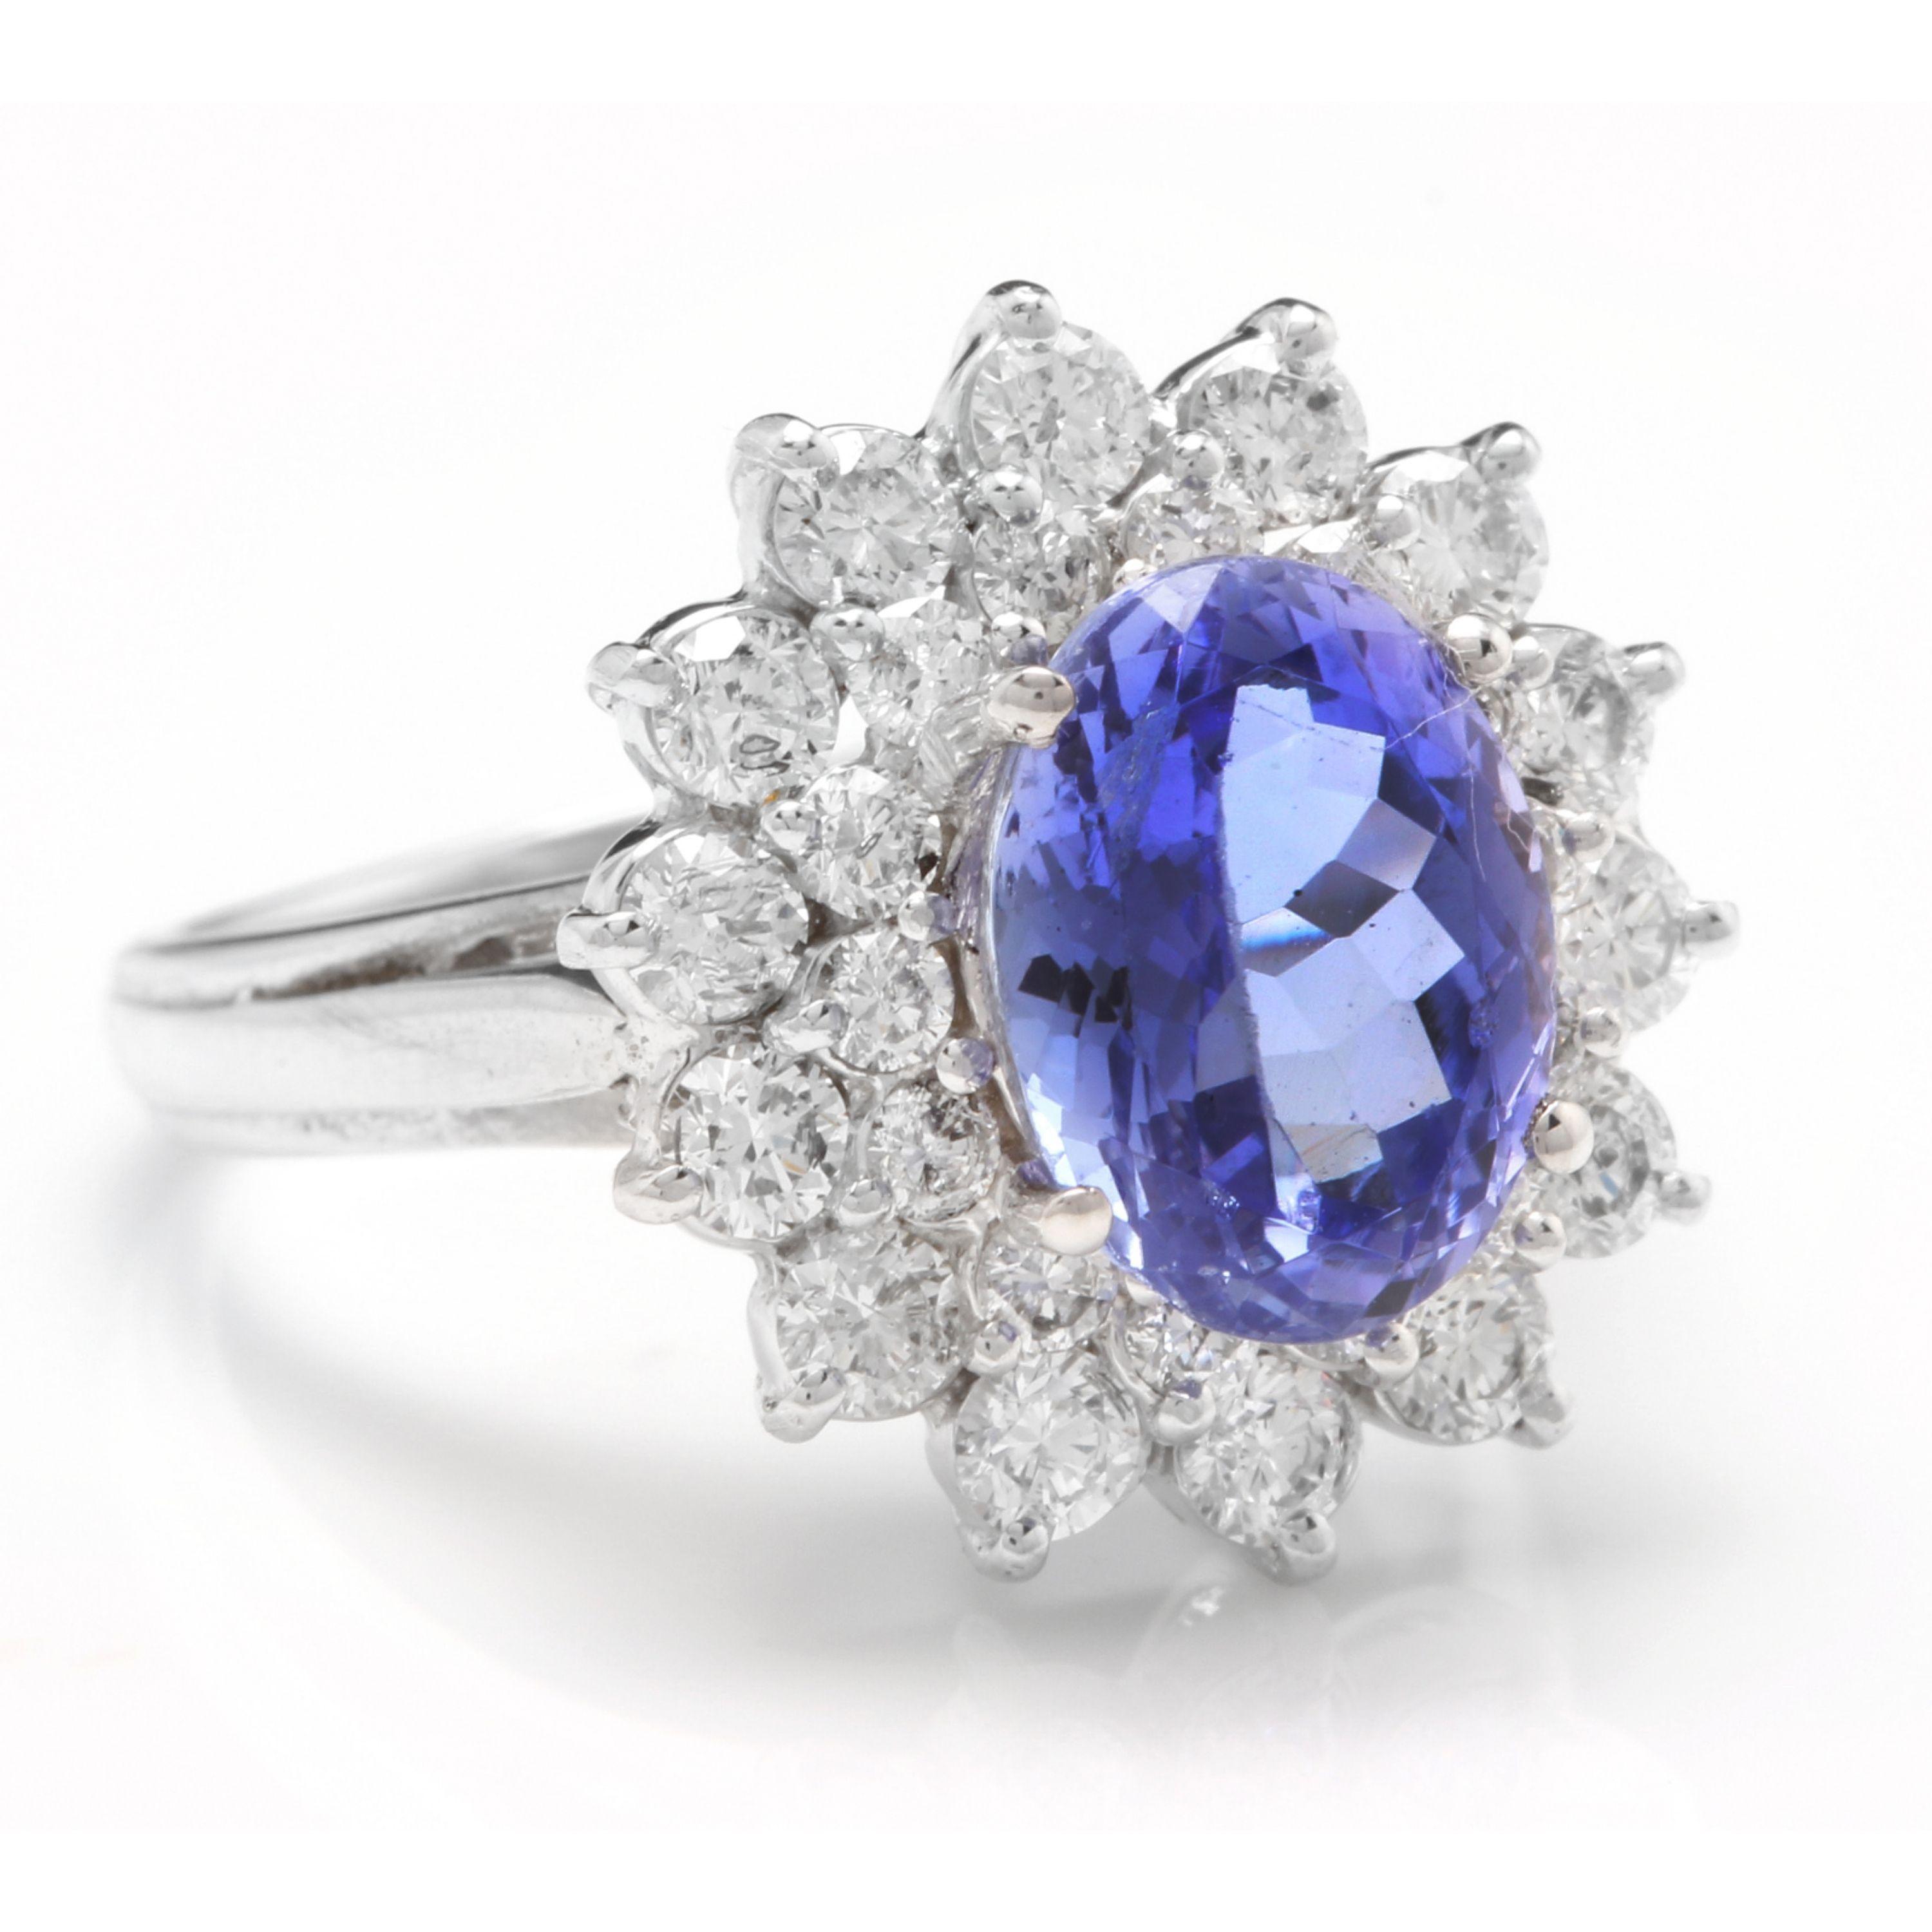 4.20 Carats Natural Very Nice Looking Tanzanite and Diamond 14K Solid White Gold Ring

Total Natural Oval Cut Tanzanite Weight is Approx. 3.05 Carats

Tanzanite Measures: Approx. 10.00 x 8.00mm

Natural Round Diamonds Weight: Approx. 1.15 Carats